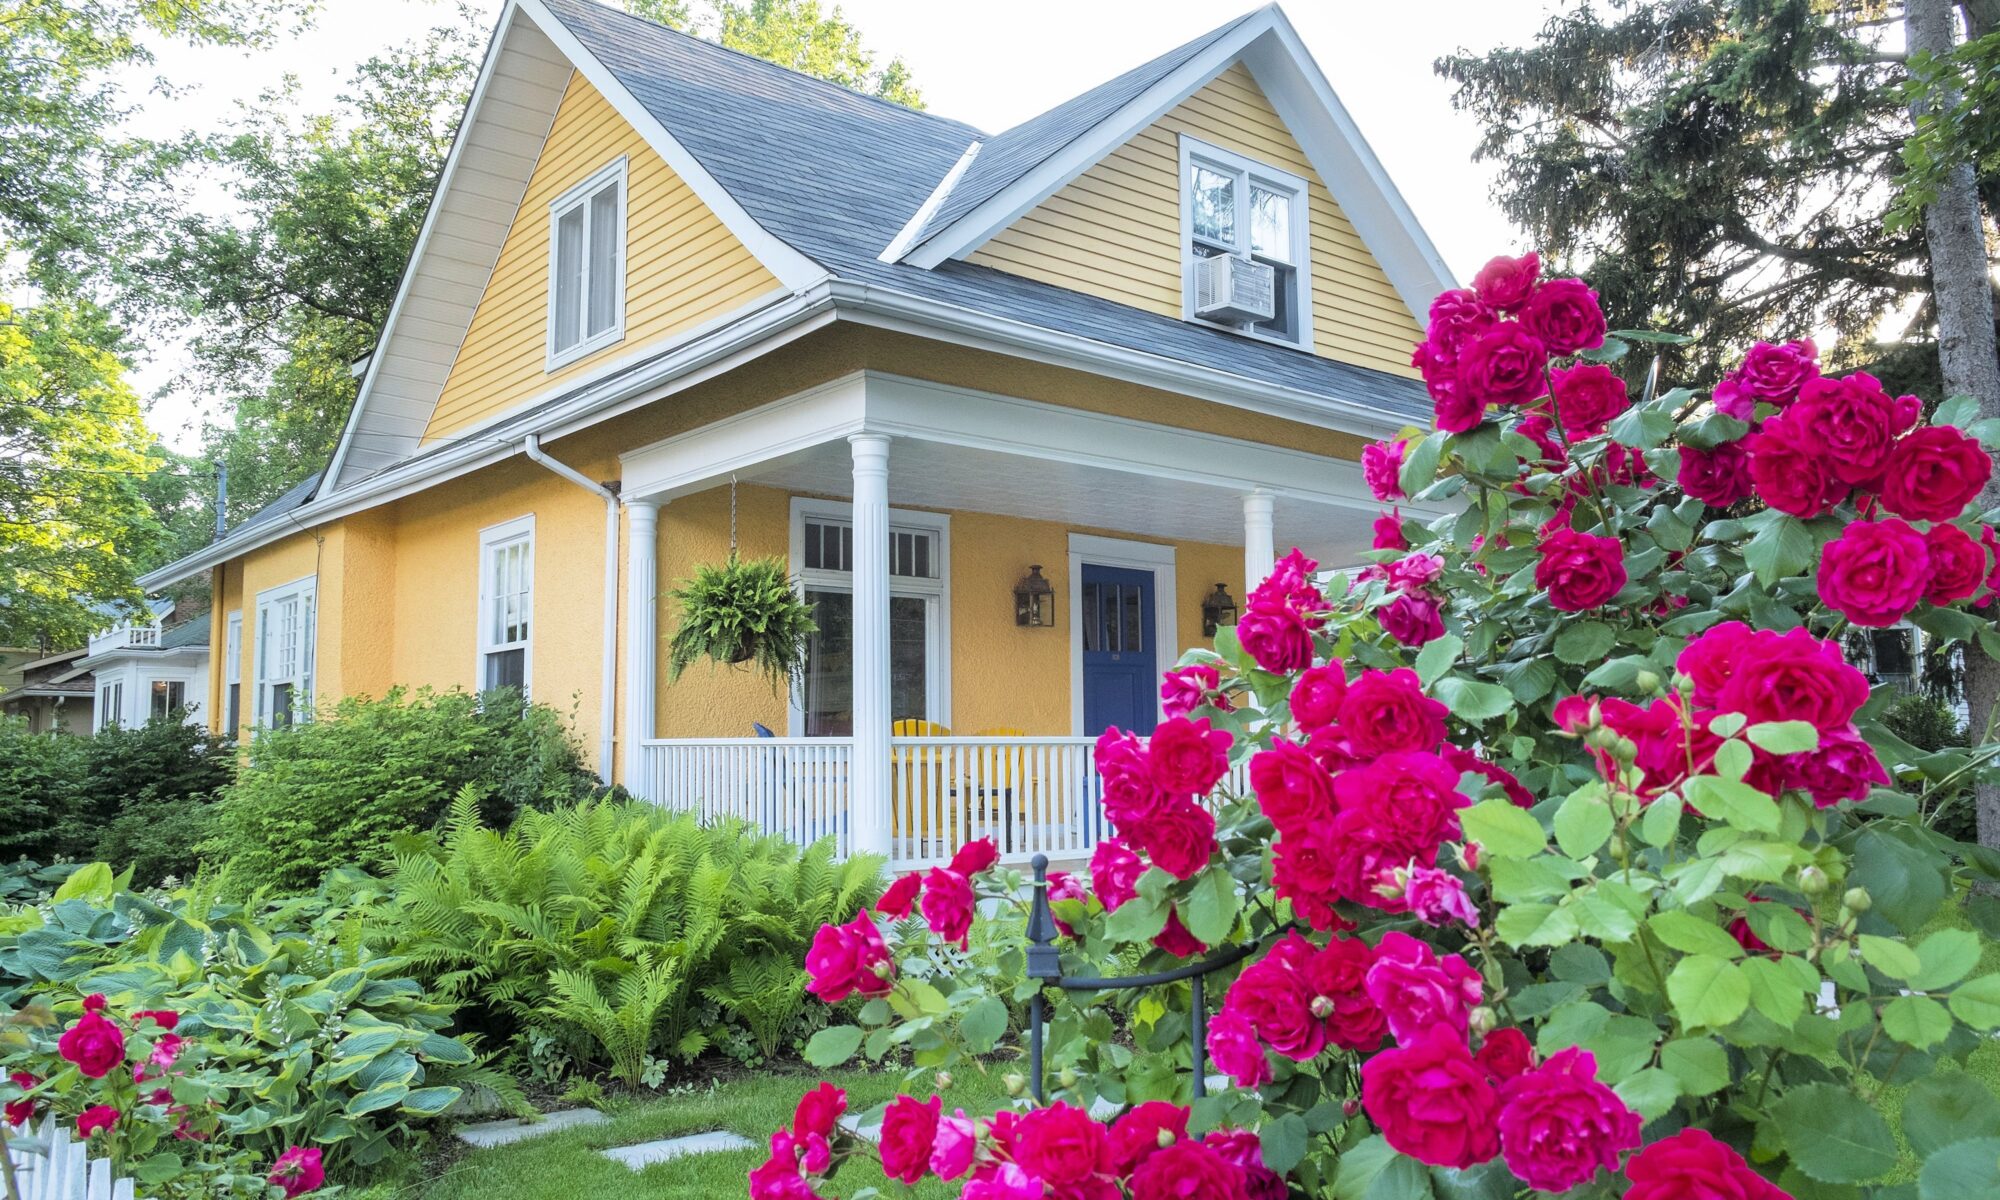 House with blooming rose bush